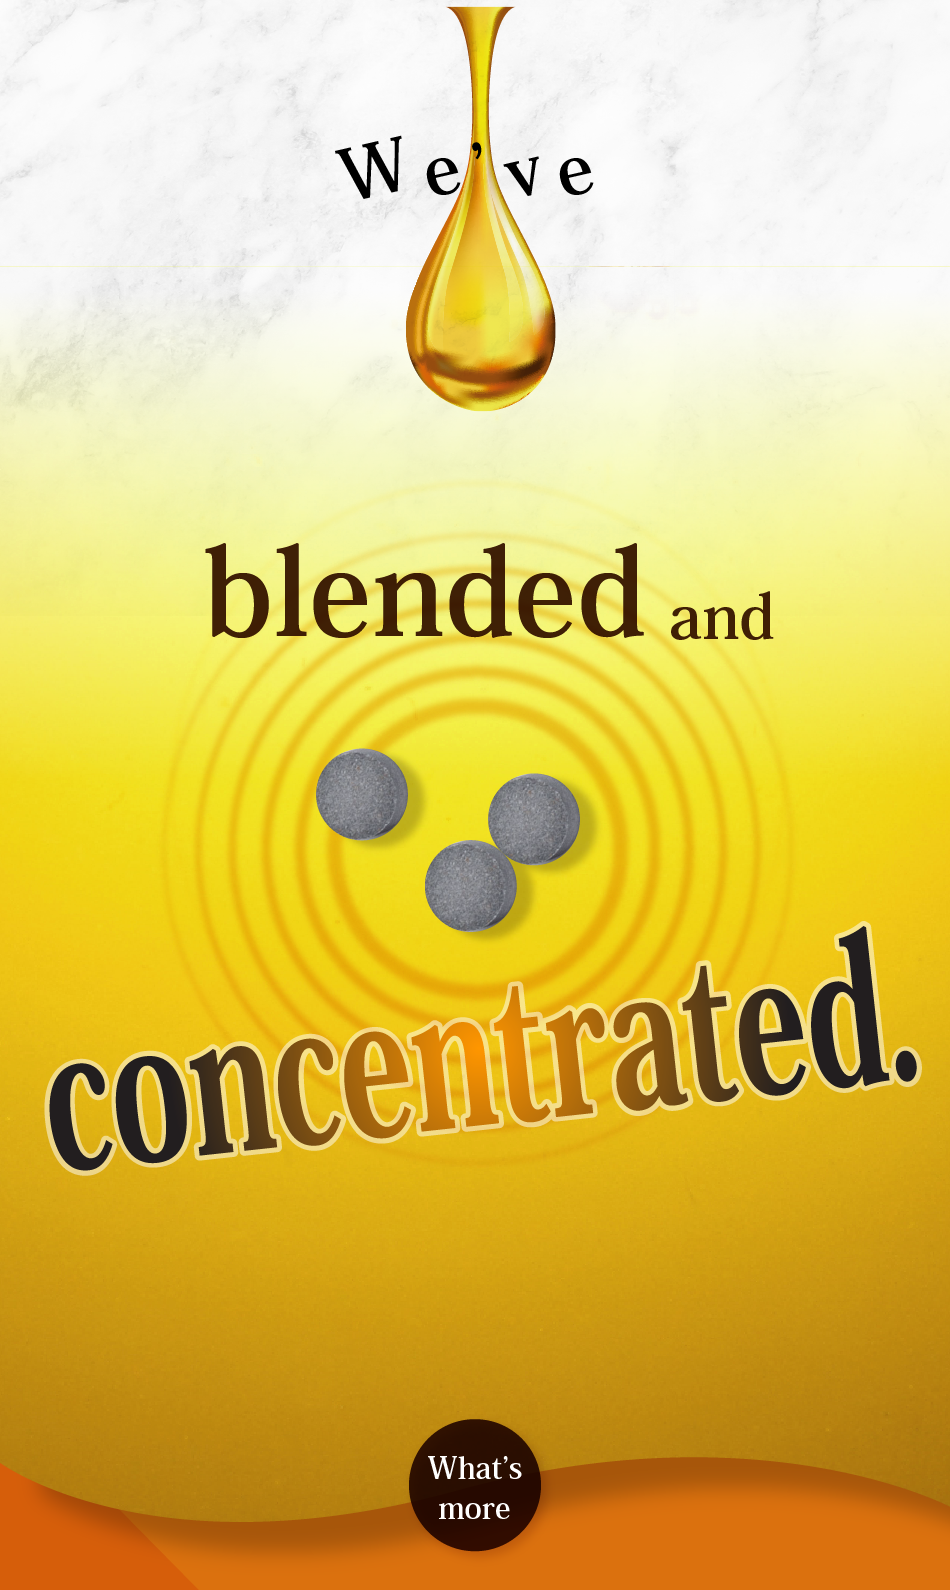 We’ve blended and concentrated What’s more